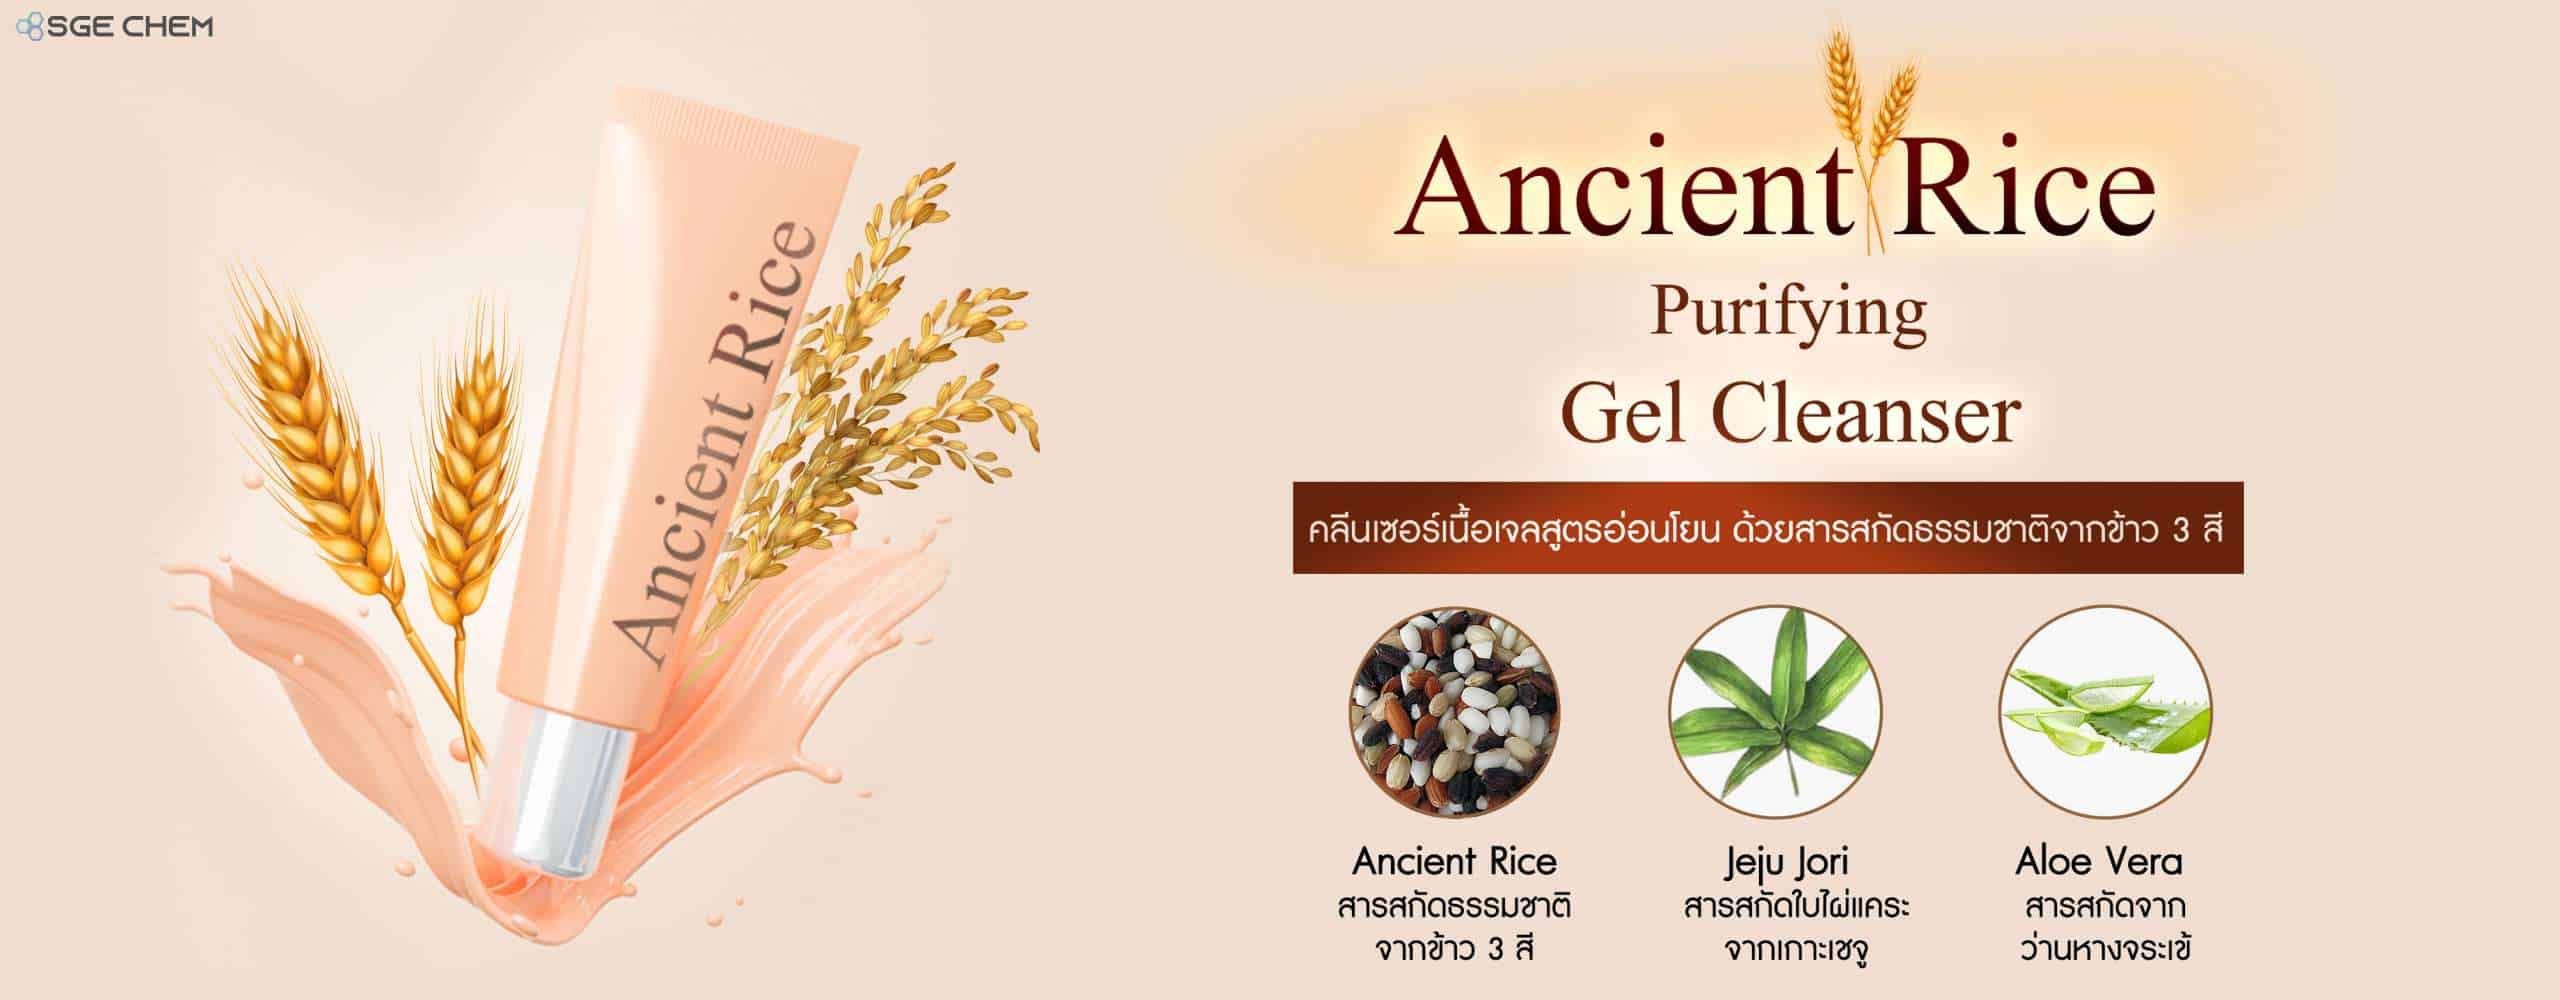 Ancient Rice Purifying Gel Cleanser